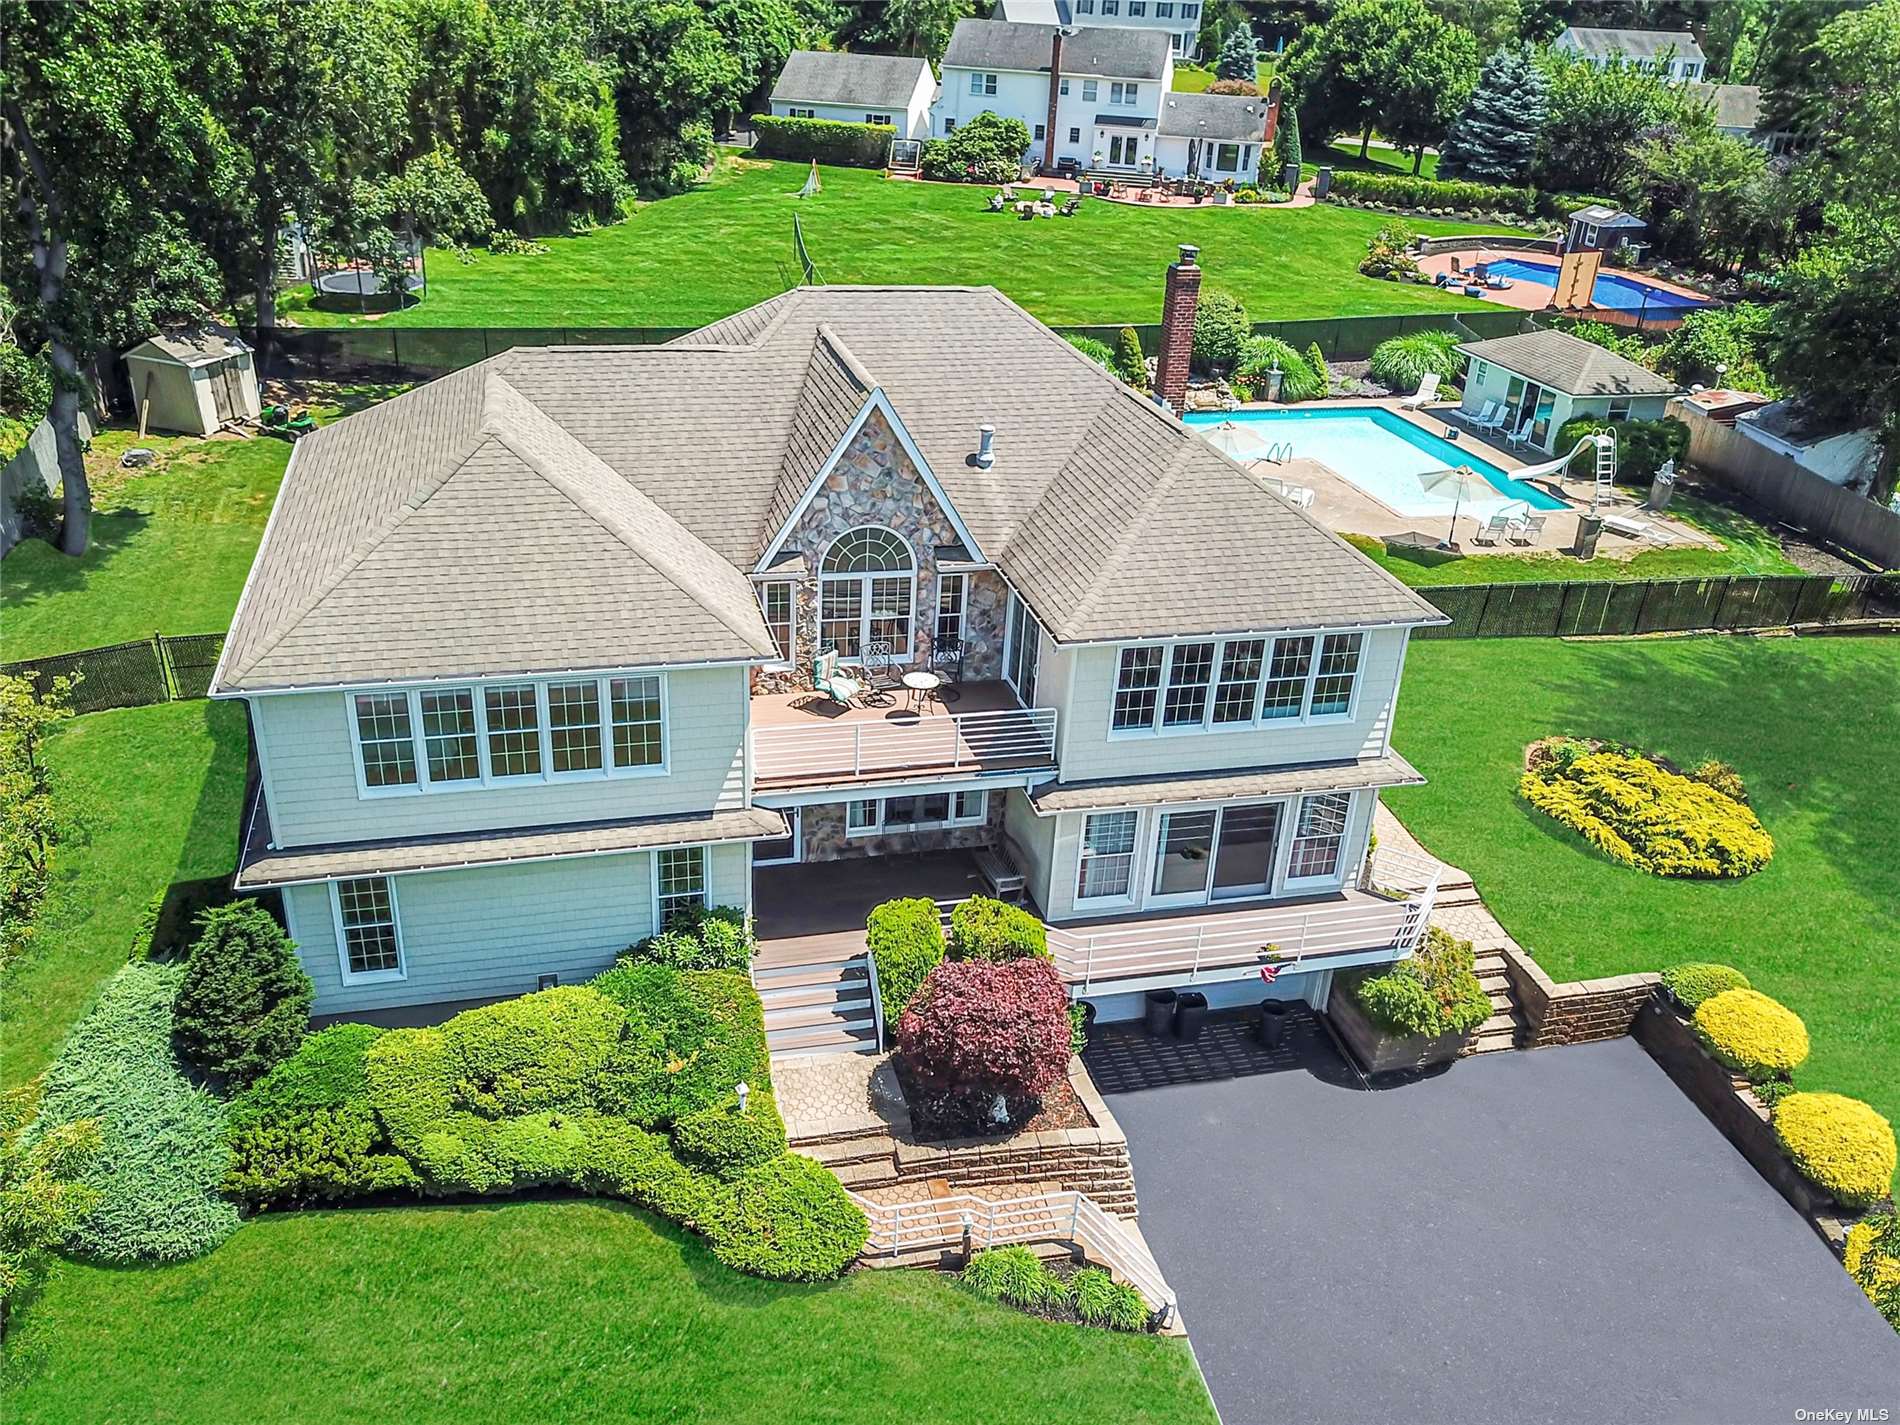 a aerial view of a house with swimming pool and a yard